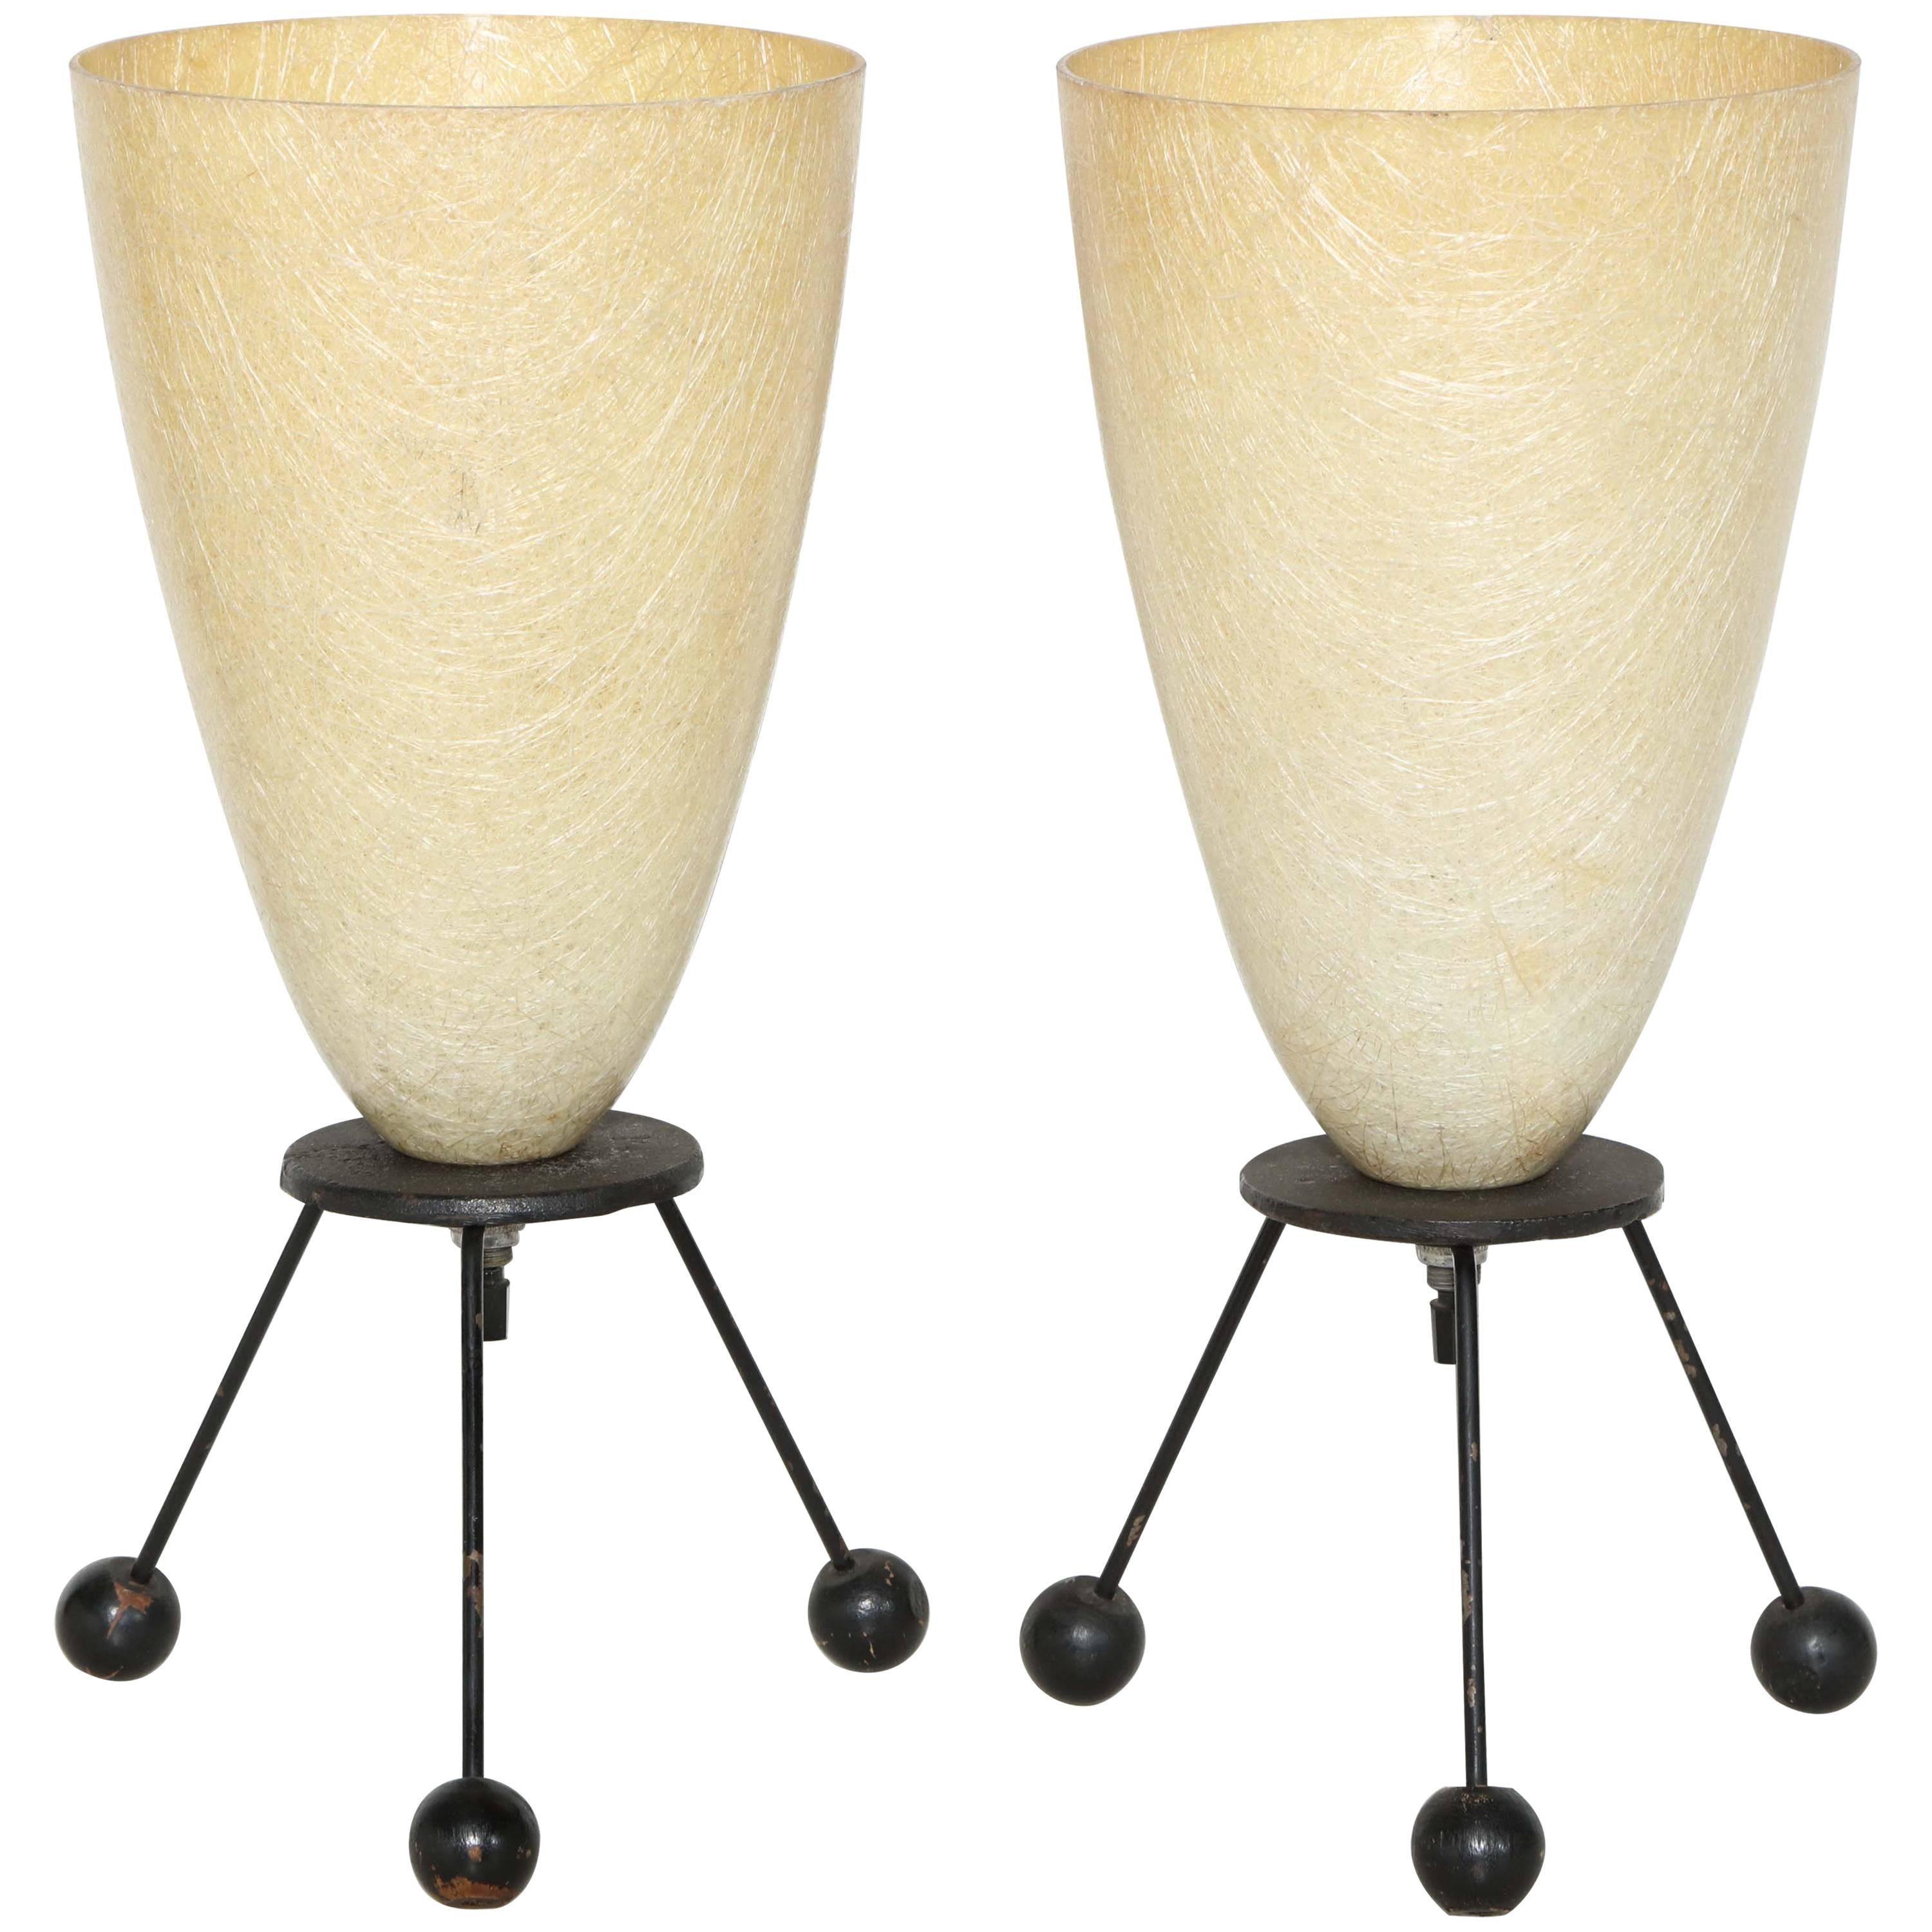 Pair of Tony Paul Style Black Wire Tripod Lamps with Cream Cone Shades 